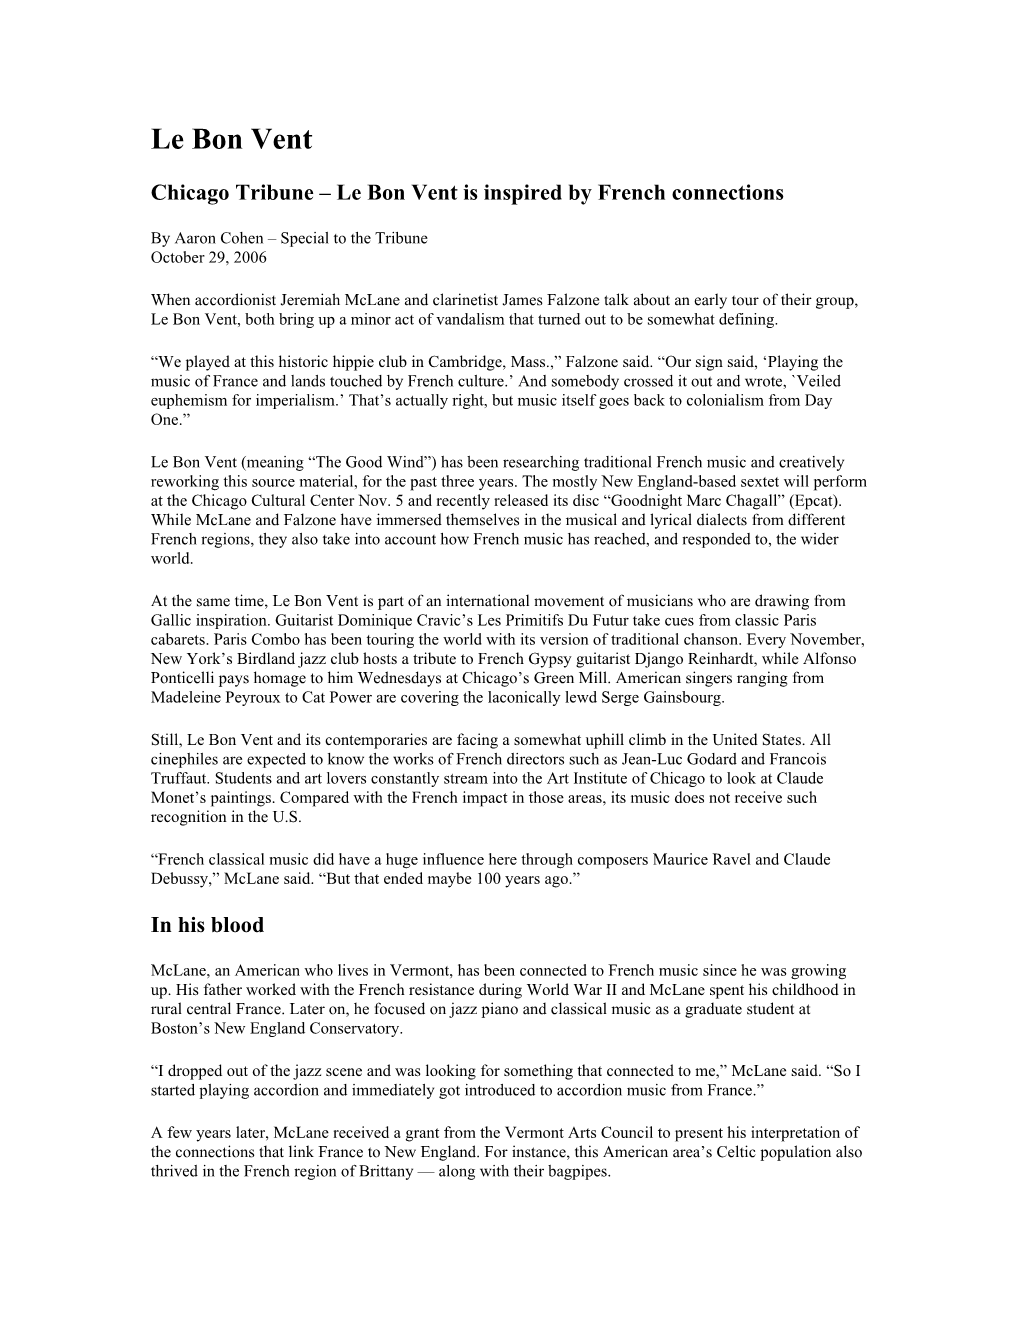 Chicago Tribune Le Bon Vent Is Inspired by French Connections